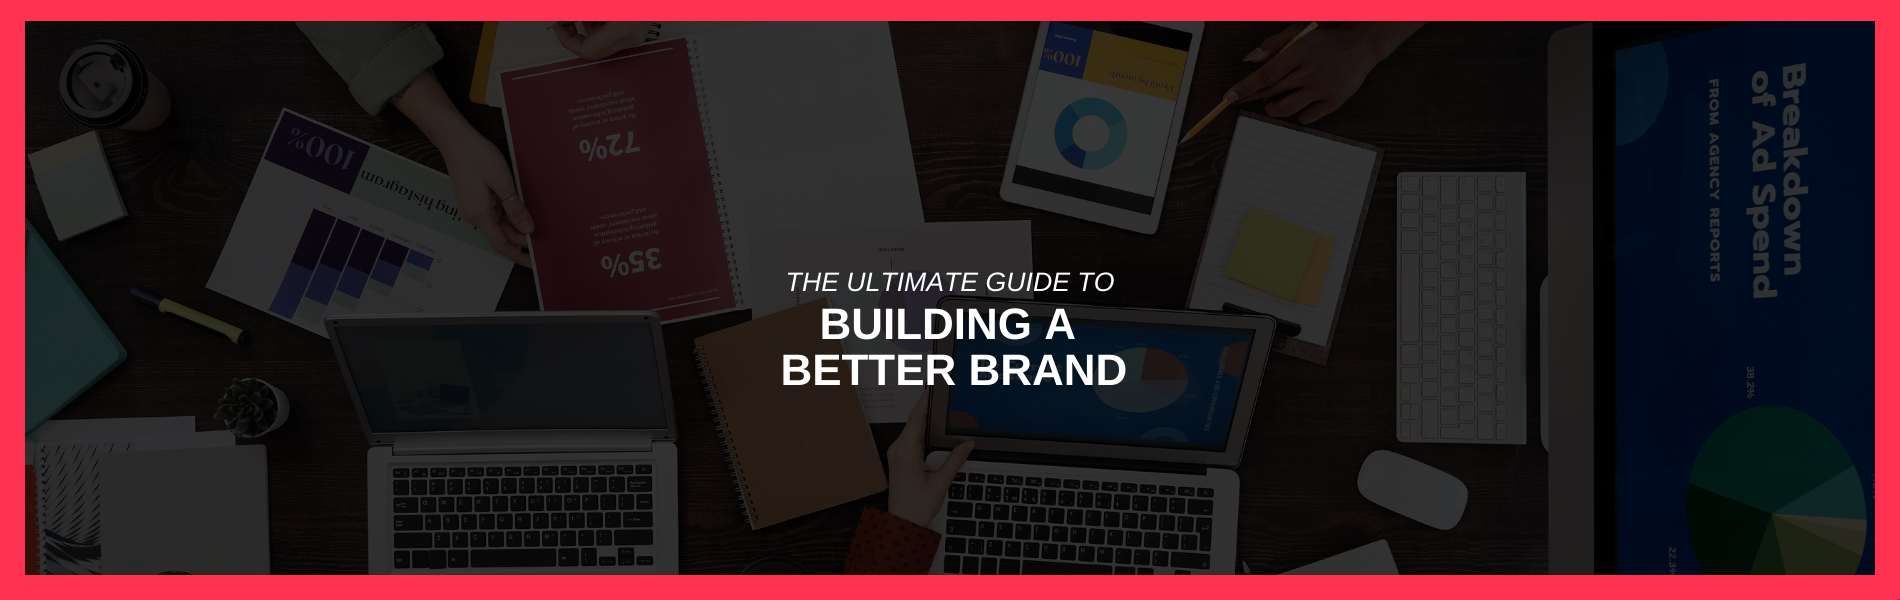 The Ultimate Guide to Building a Better Brand